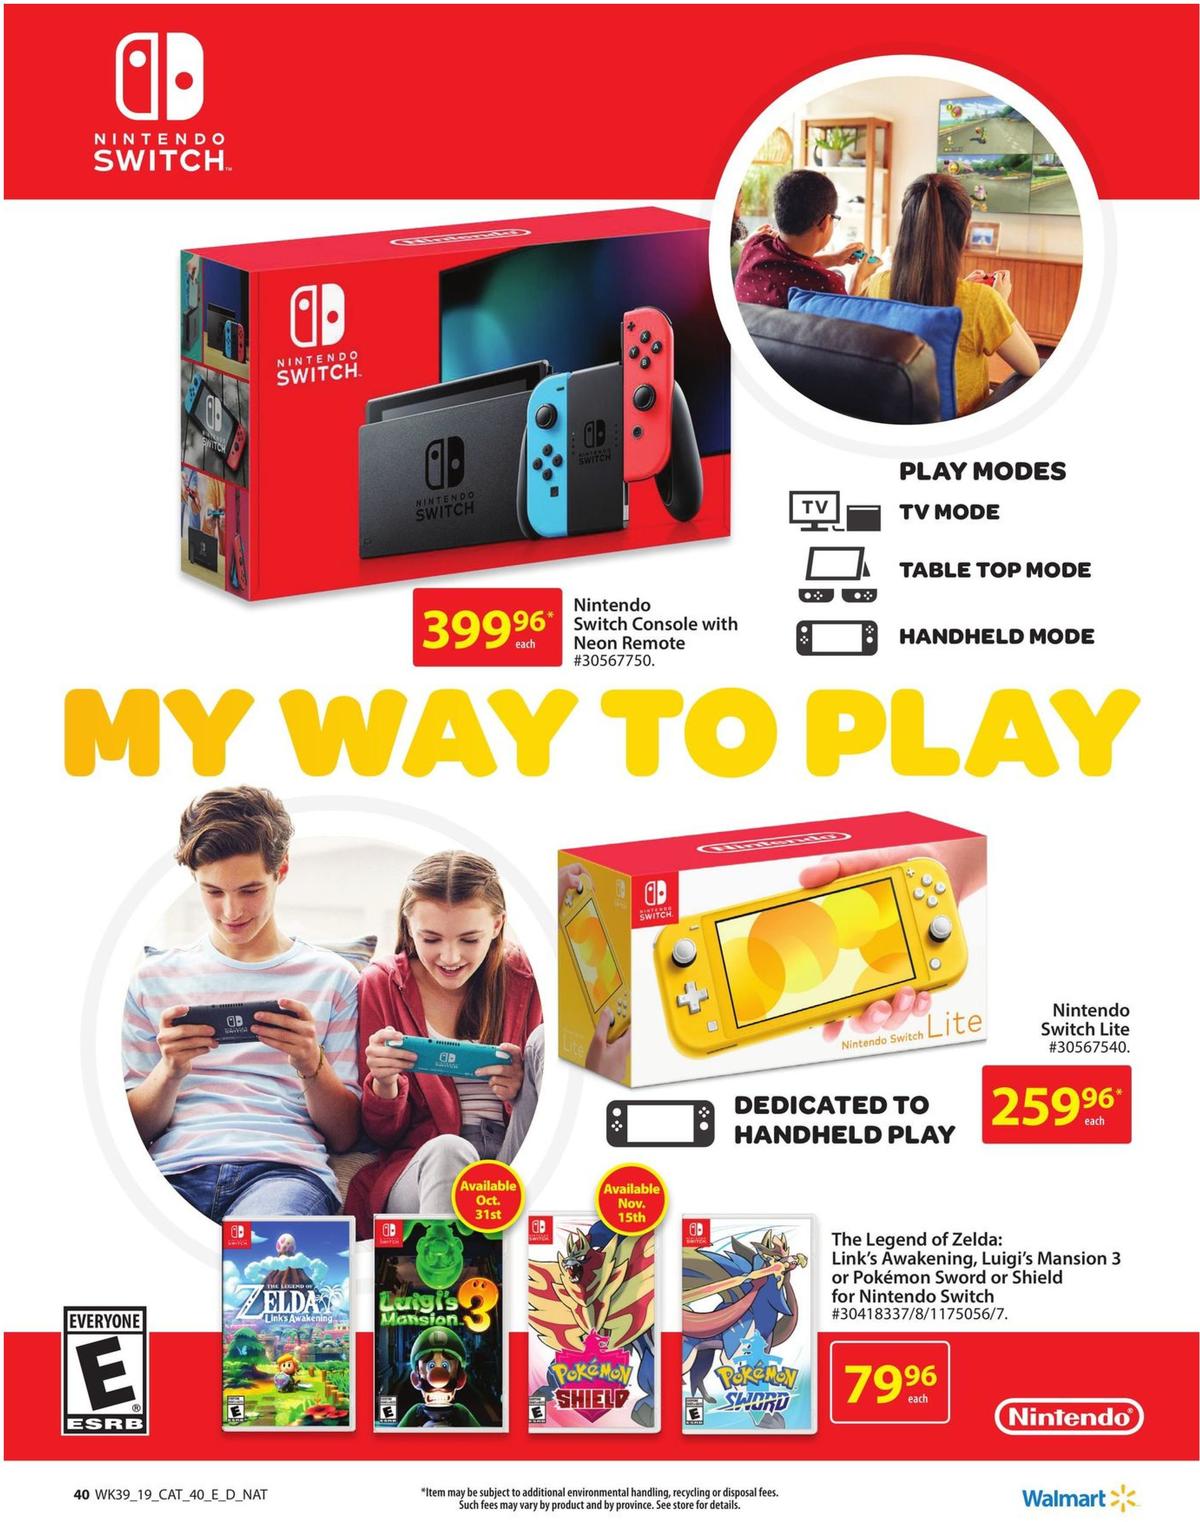 Walmart Toy Shop Flyer from October 17